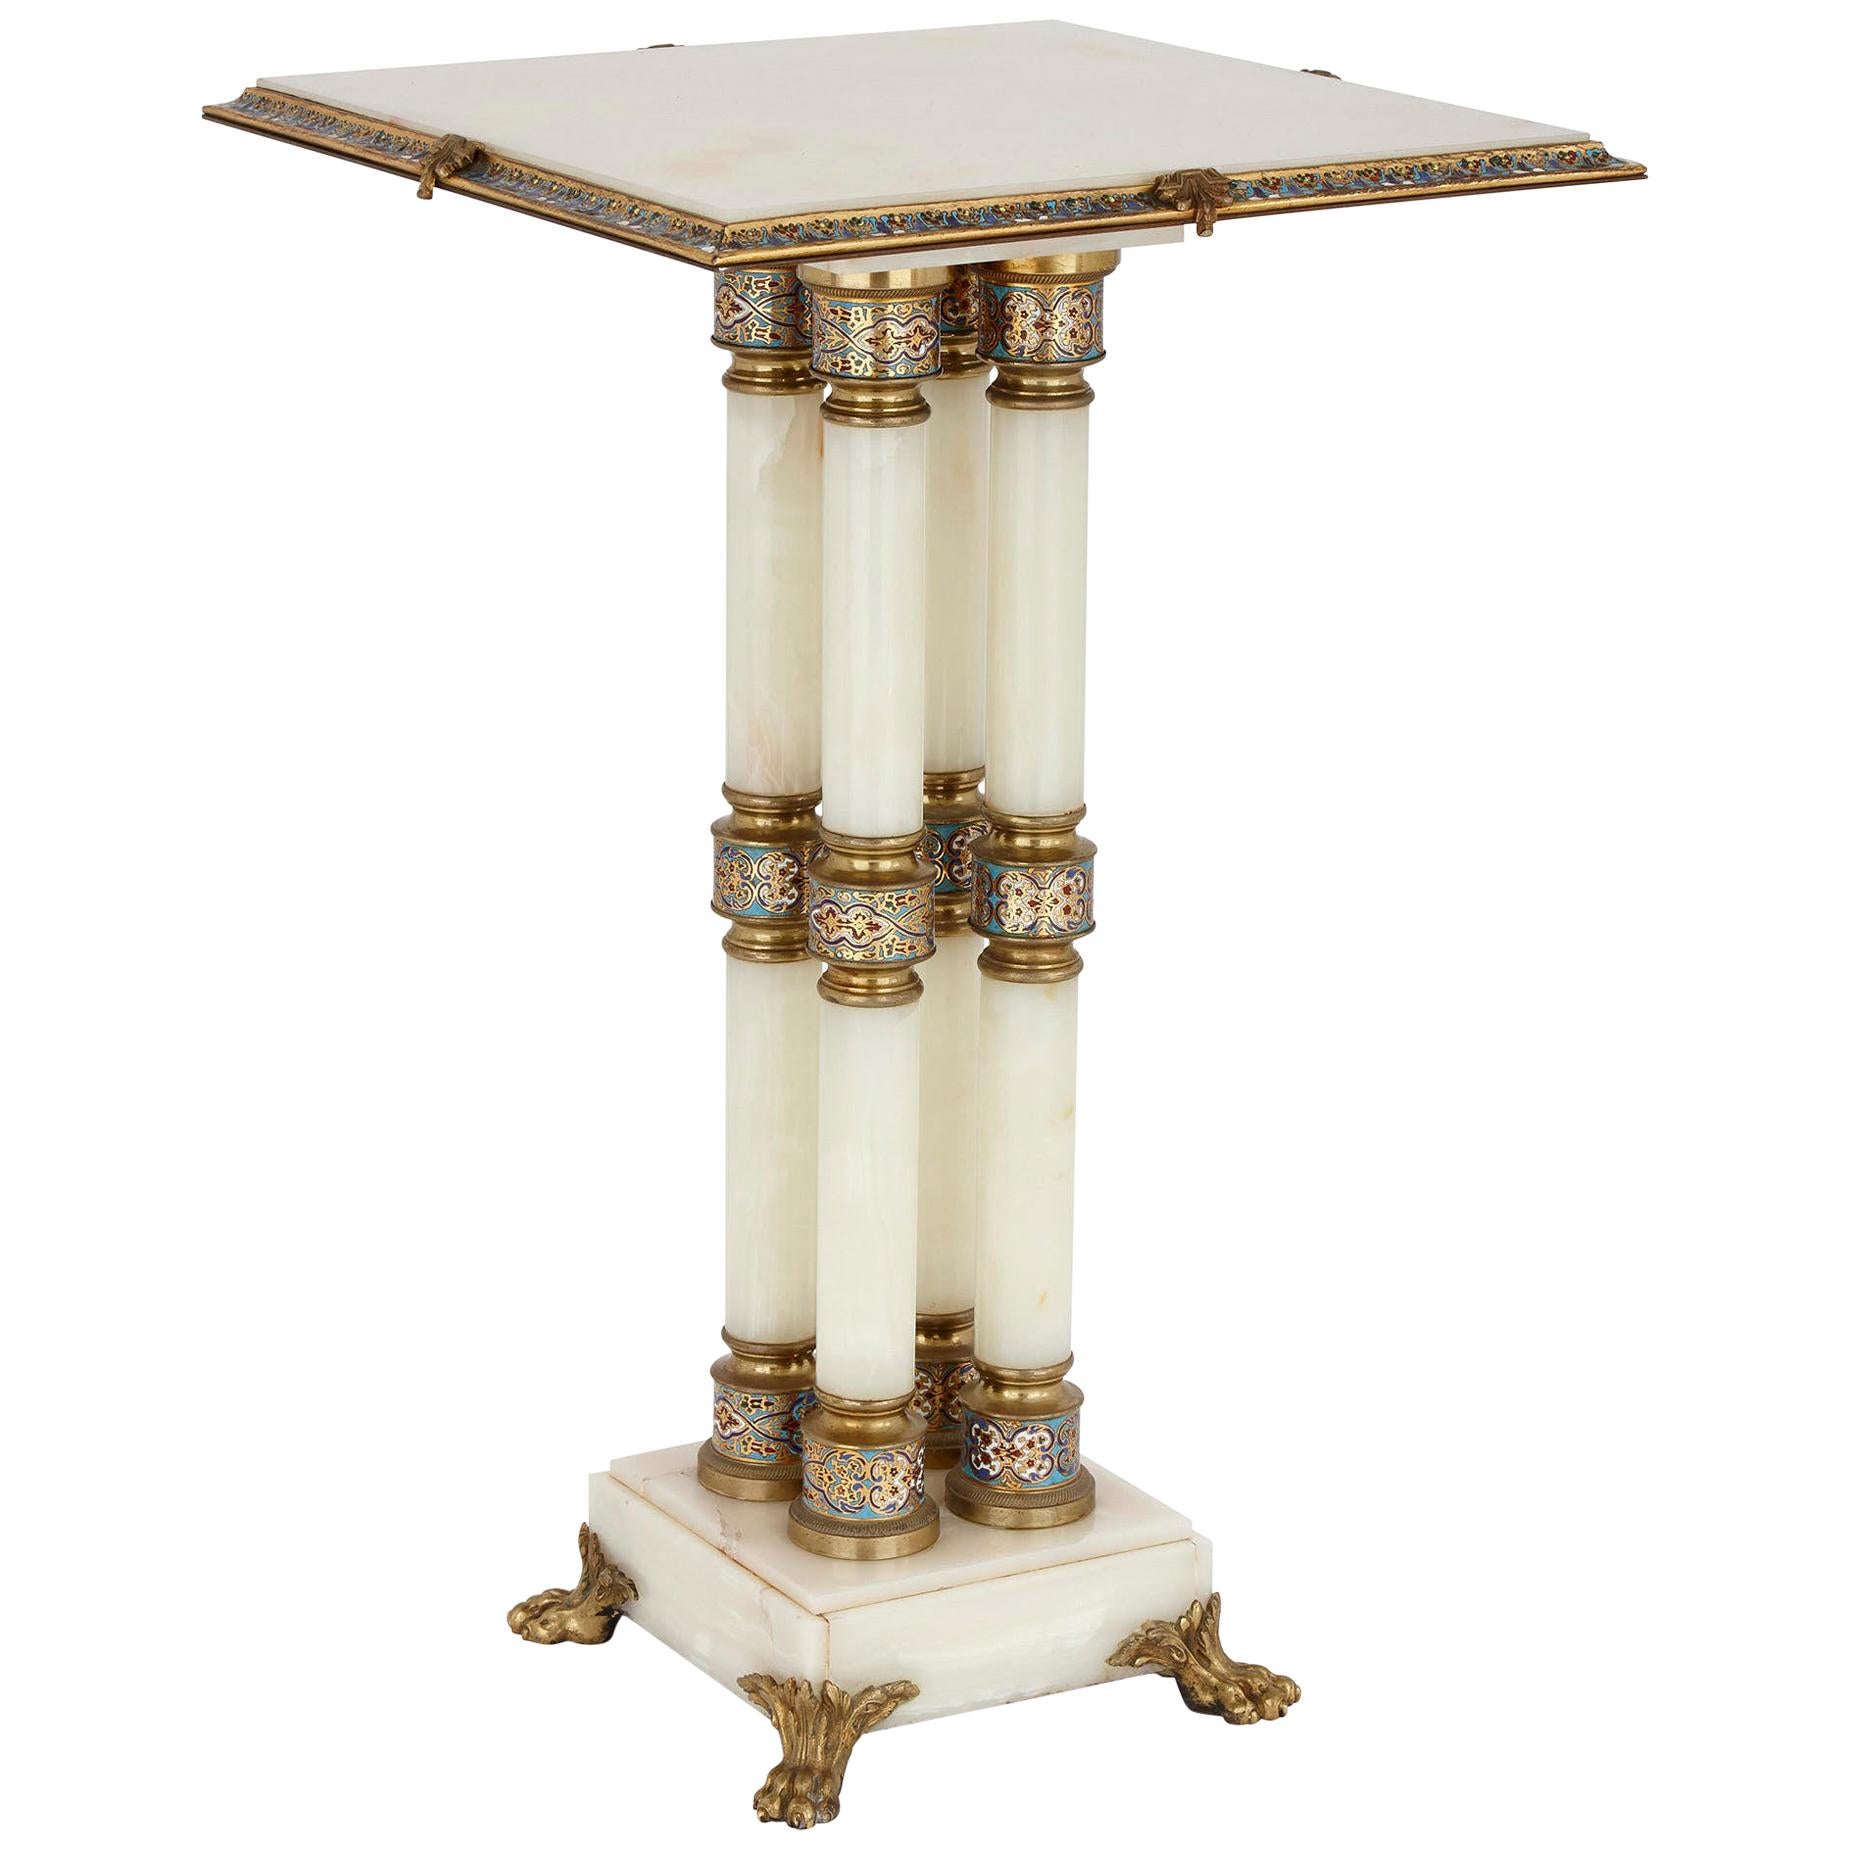 Champlevé and Cloisonné Enamel Mounted White Onyx and Gilt Bronze Table